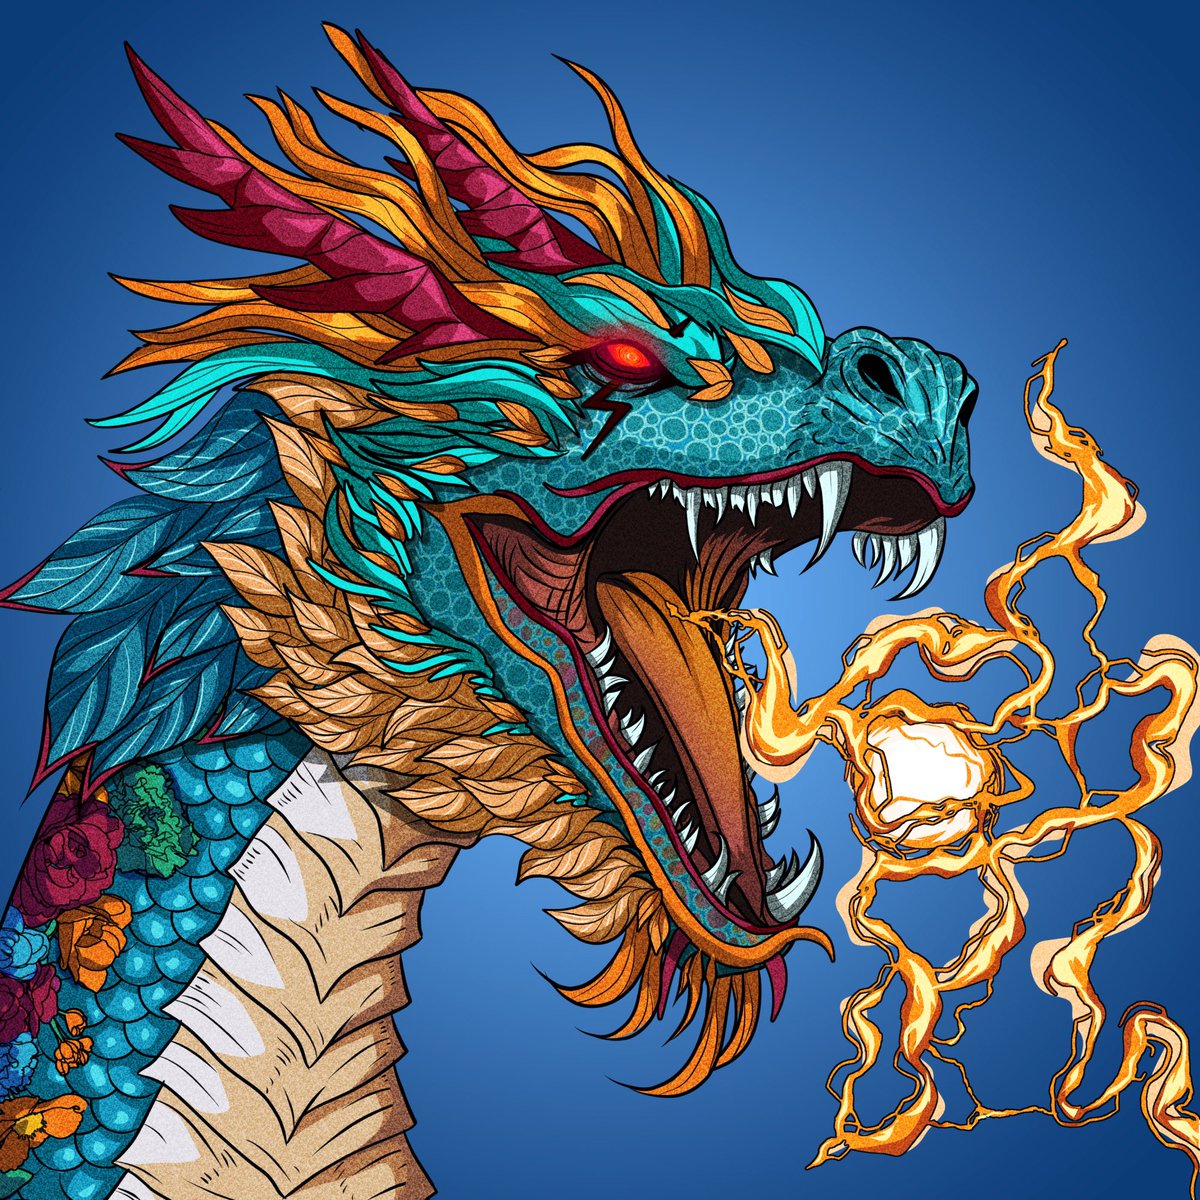 AZURONG SNEAK PEEK ⛩️ The only way to get rid of dragons is to have one of your own ⚔️🐉 Stay tuned for more information about the collection 🔥